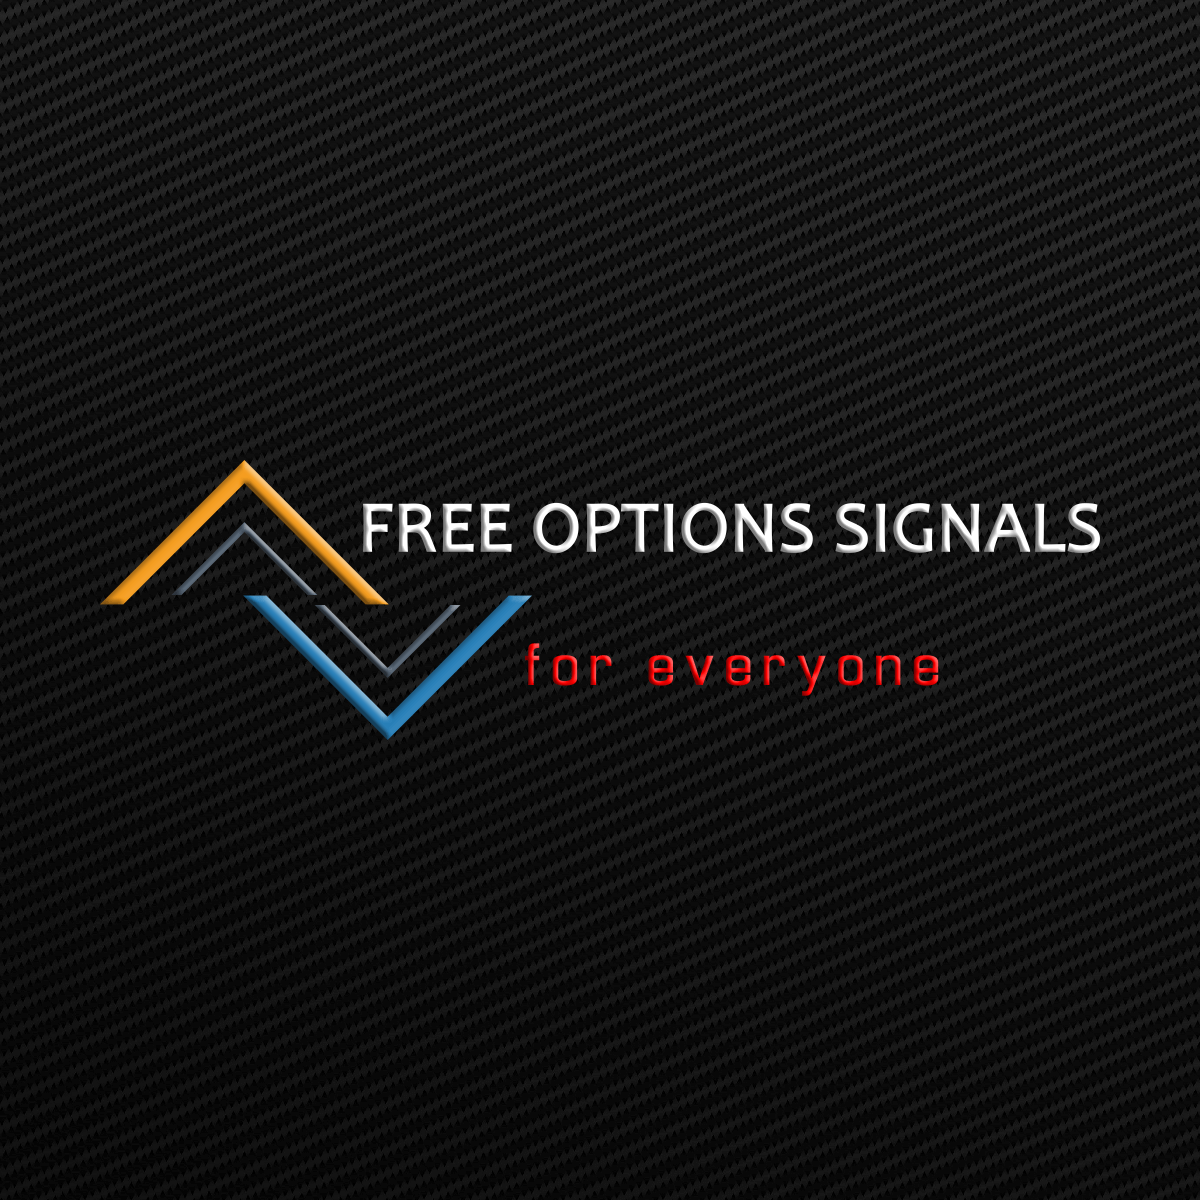 Best binary options signals services